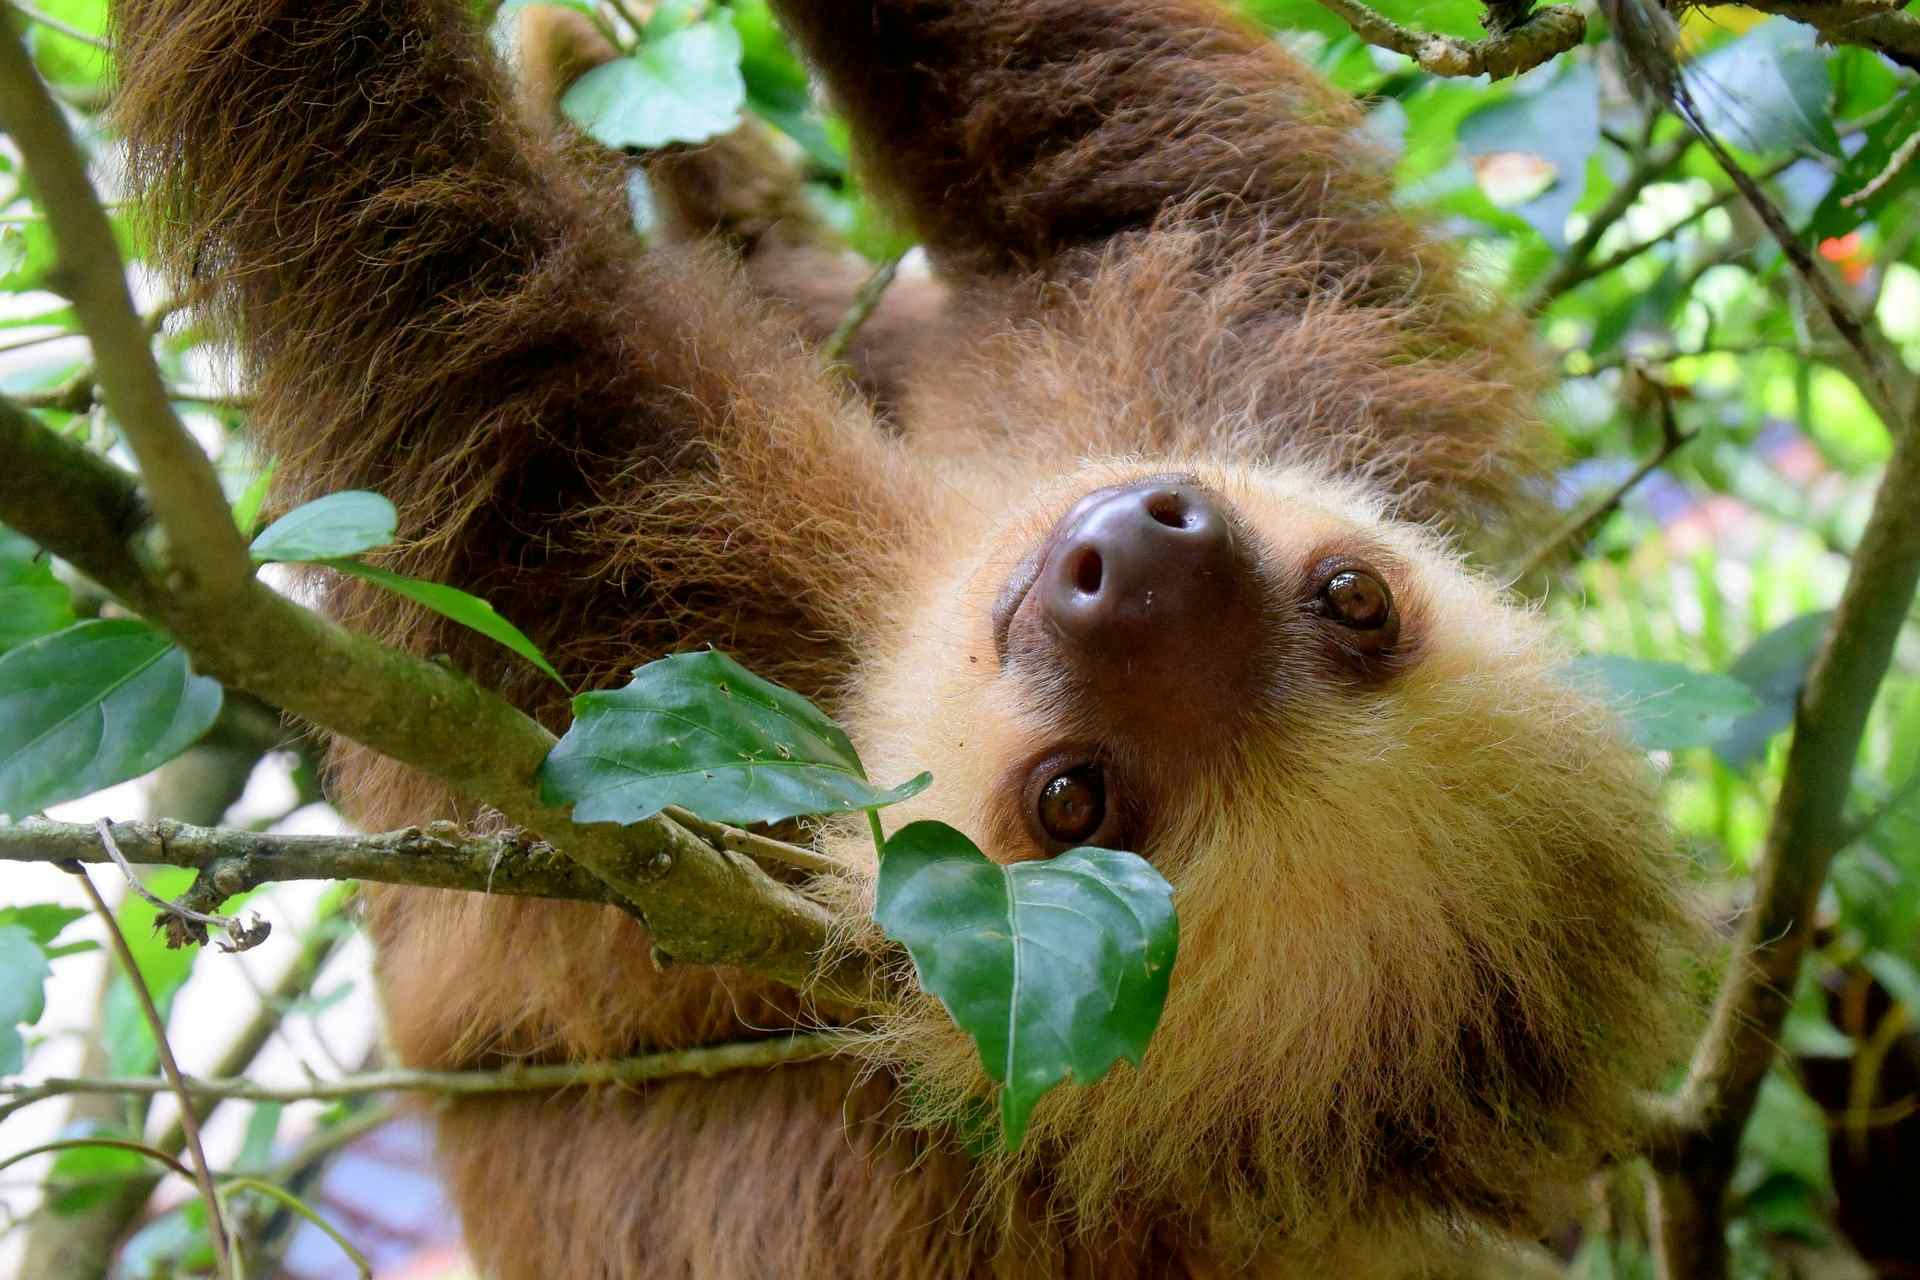 Sloth hanging upside down in a tree, Costa Rica